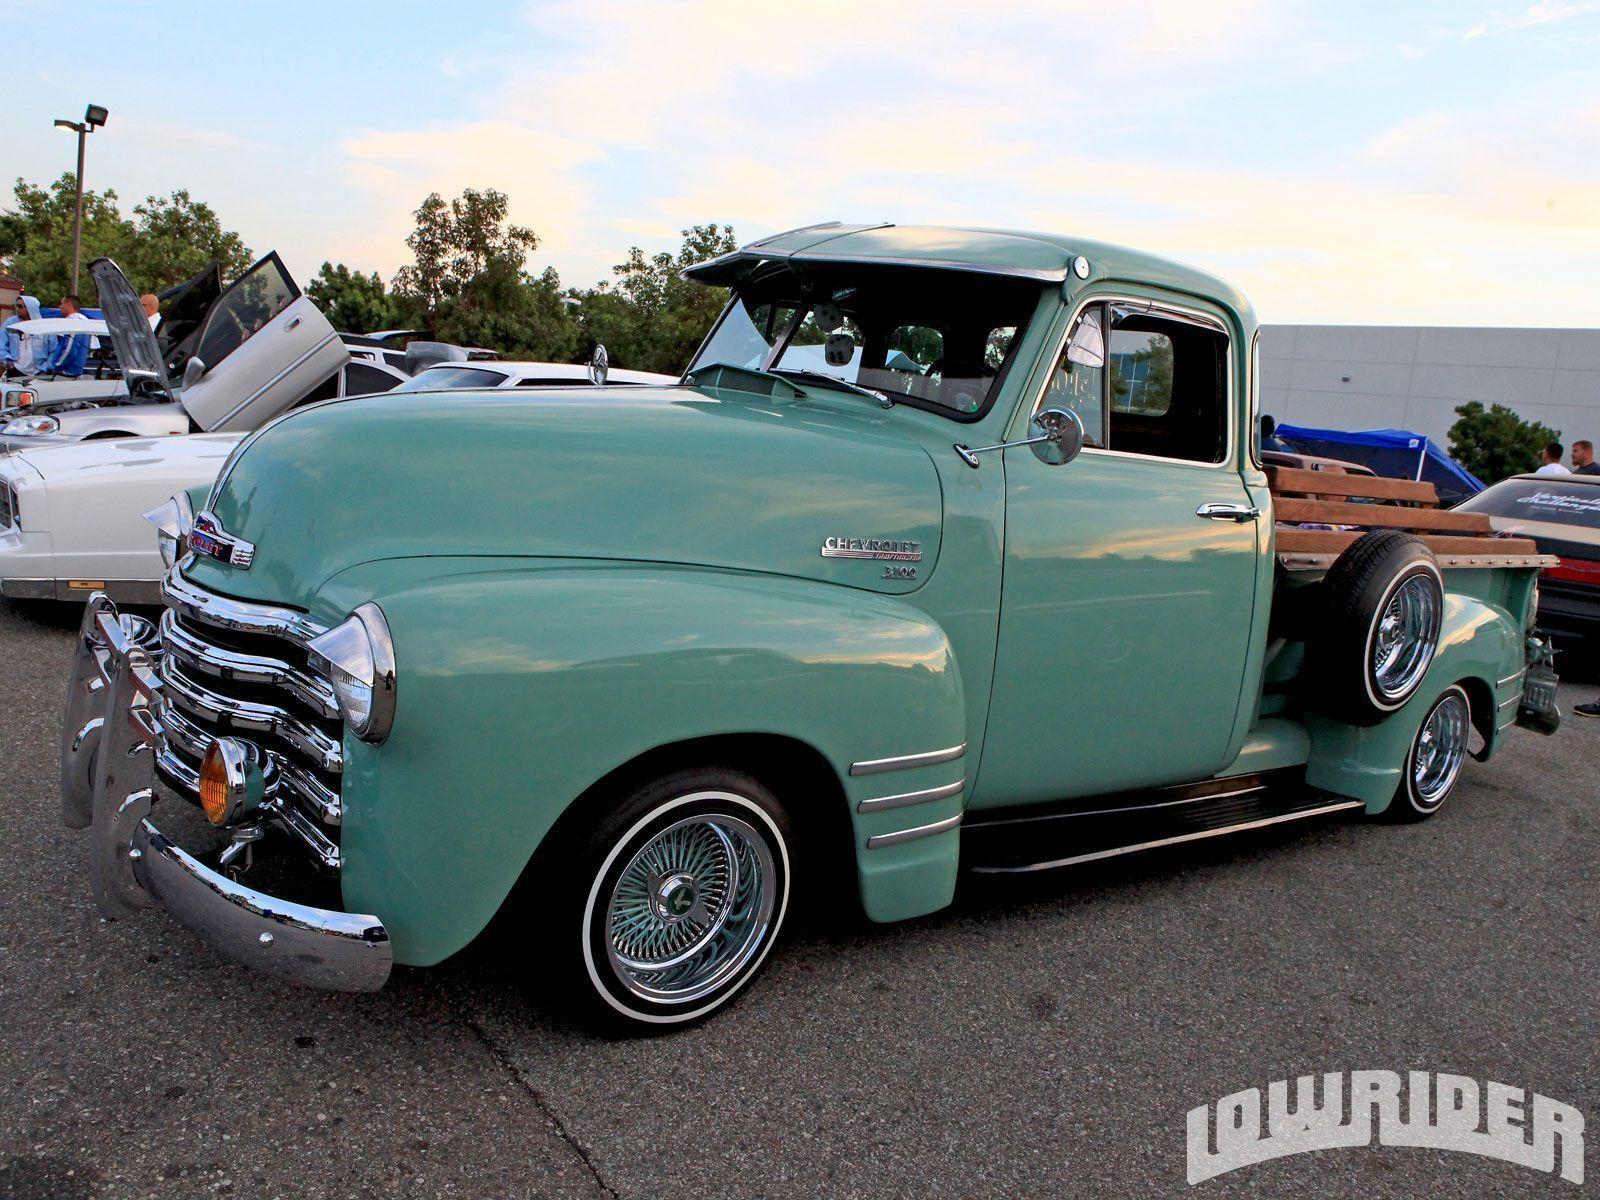 Related Picture Lowrider Trucks Wallpaper Lowrider Car Picture